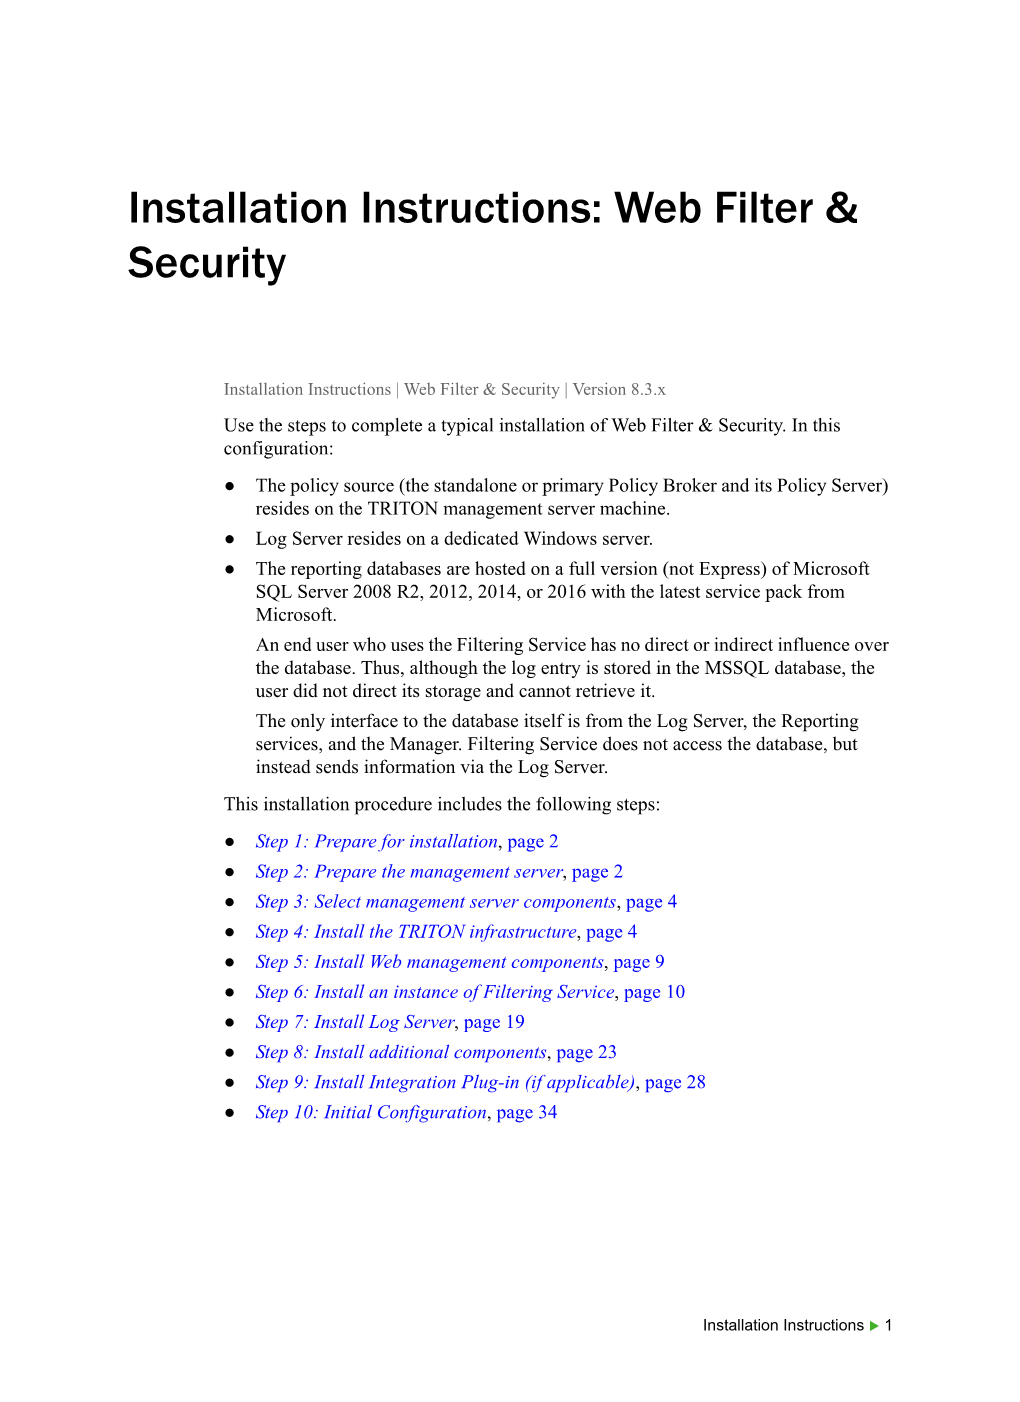 Installation Instructions: Web Filter & Security